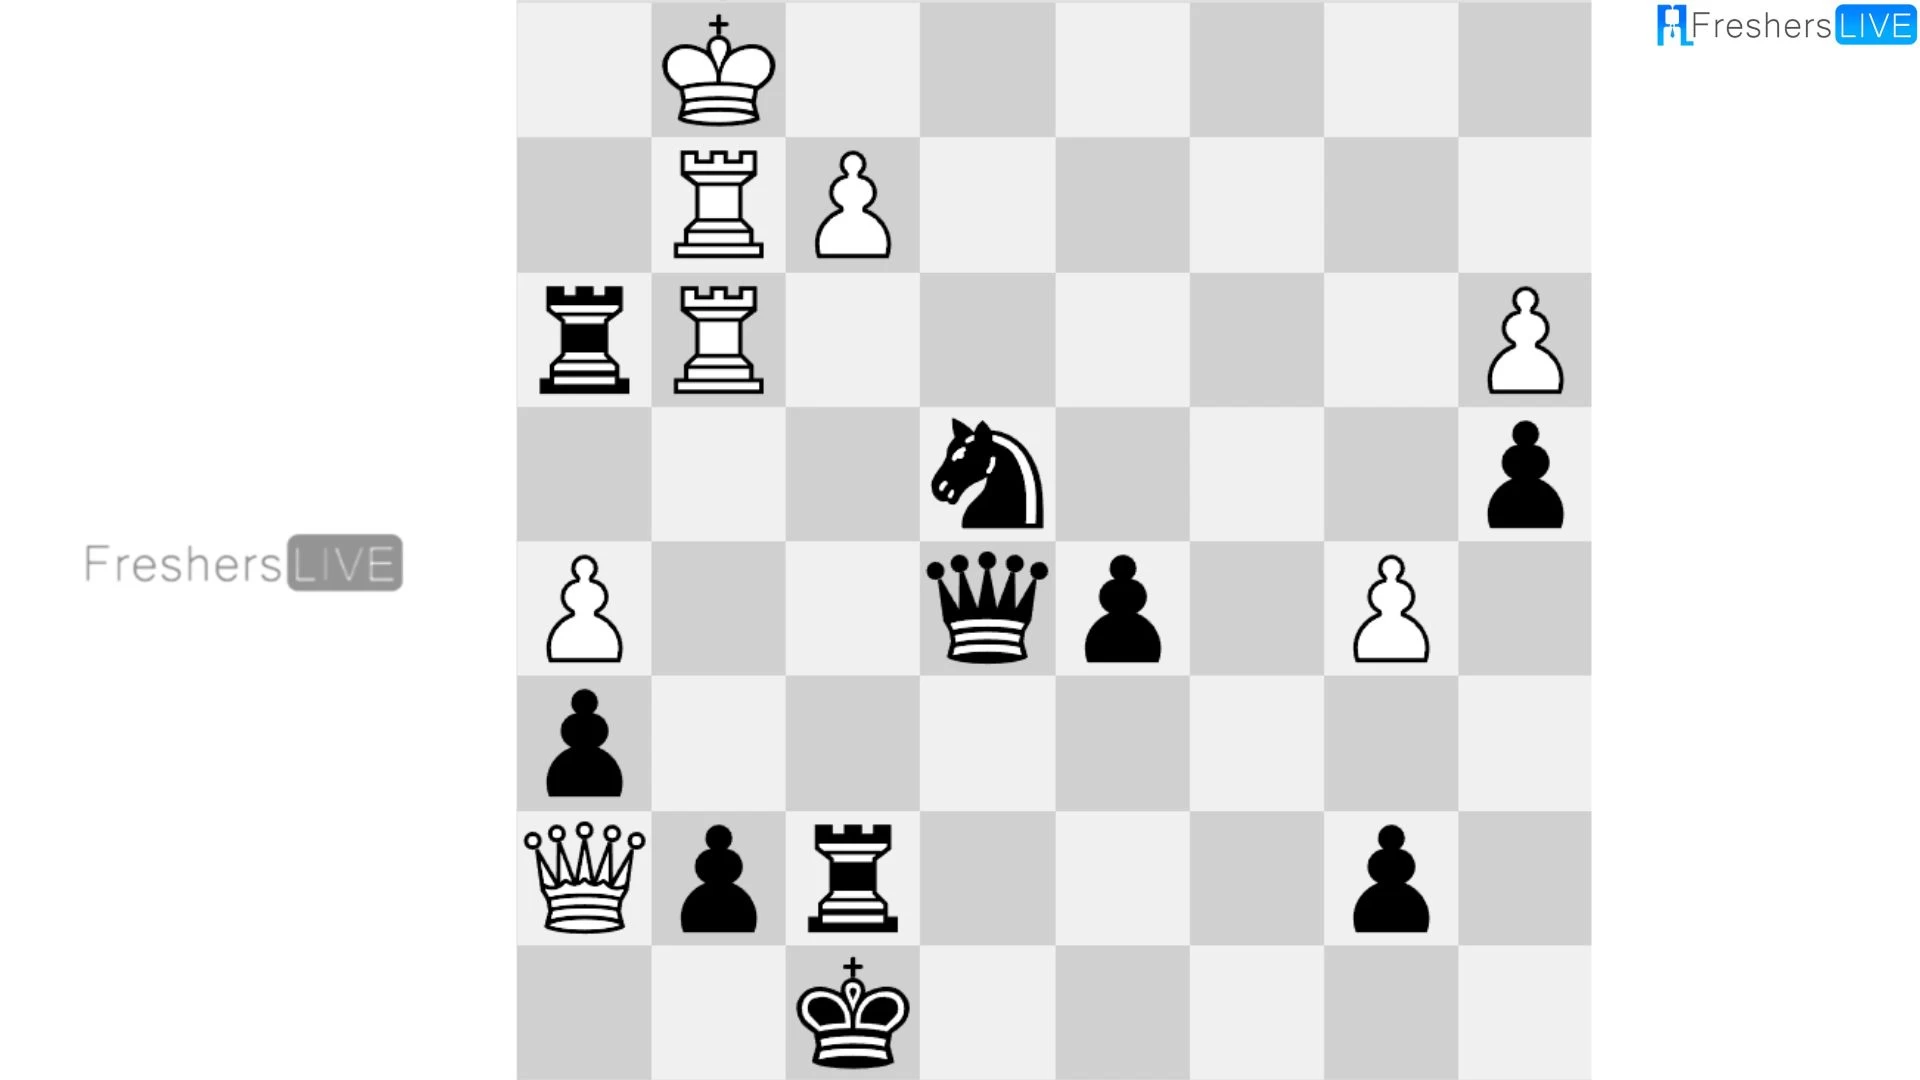 Can You Solve This Chess Puzzle in Just One Move?